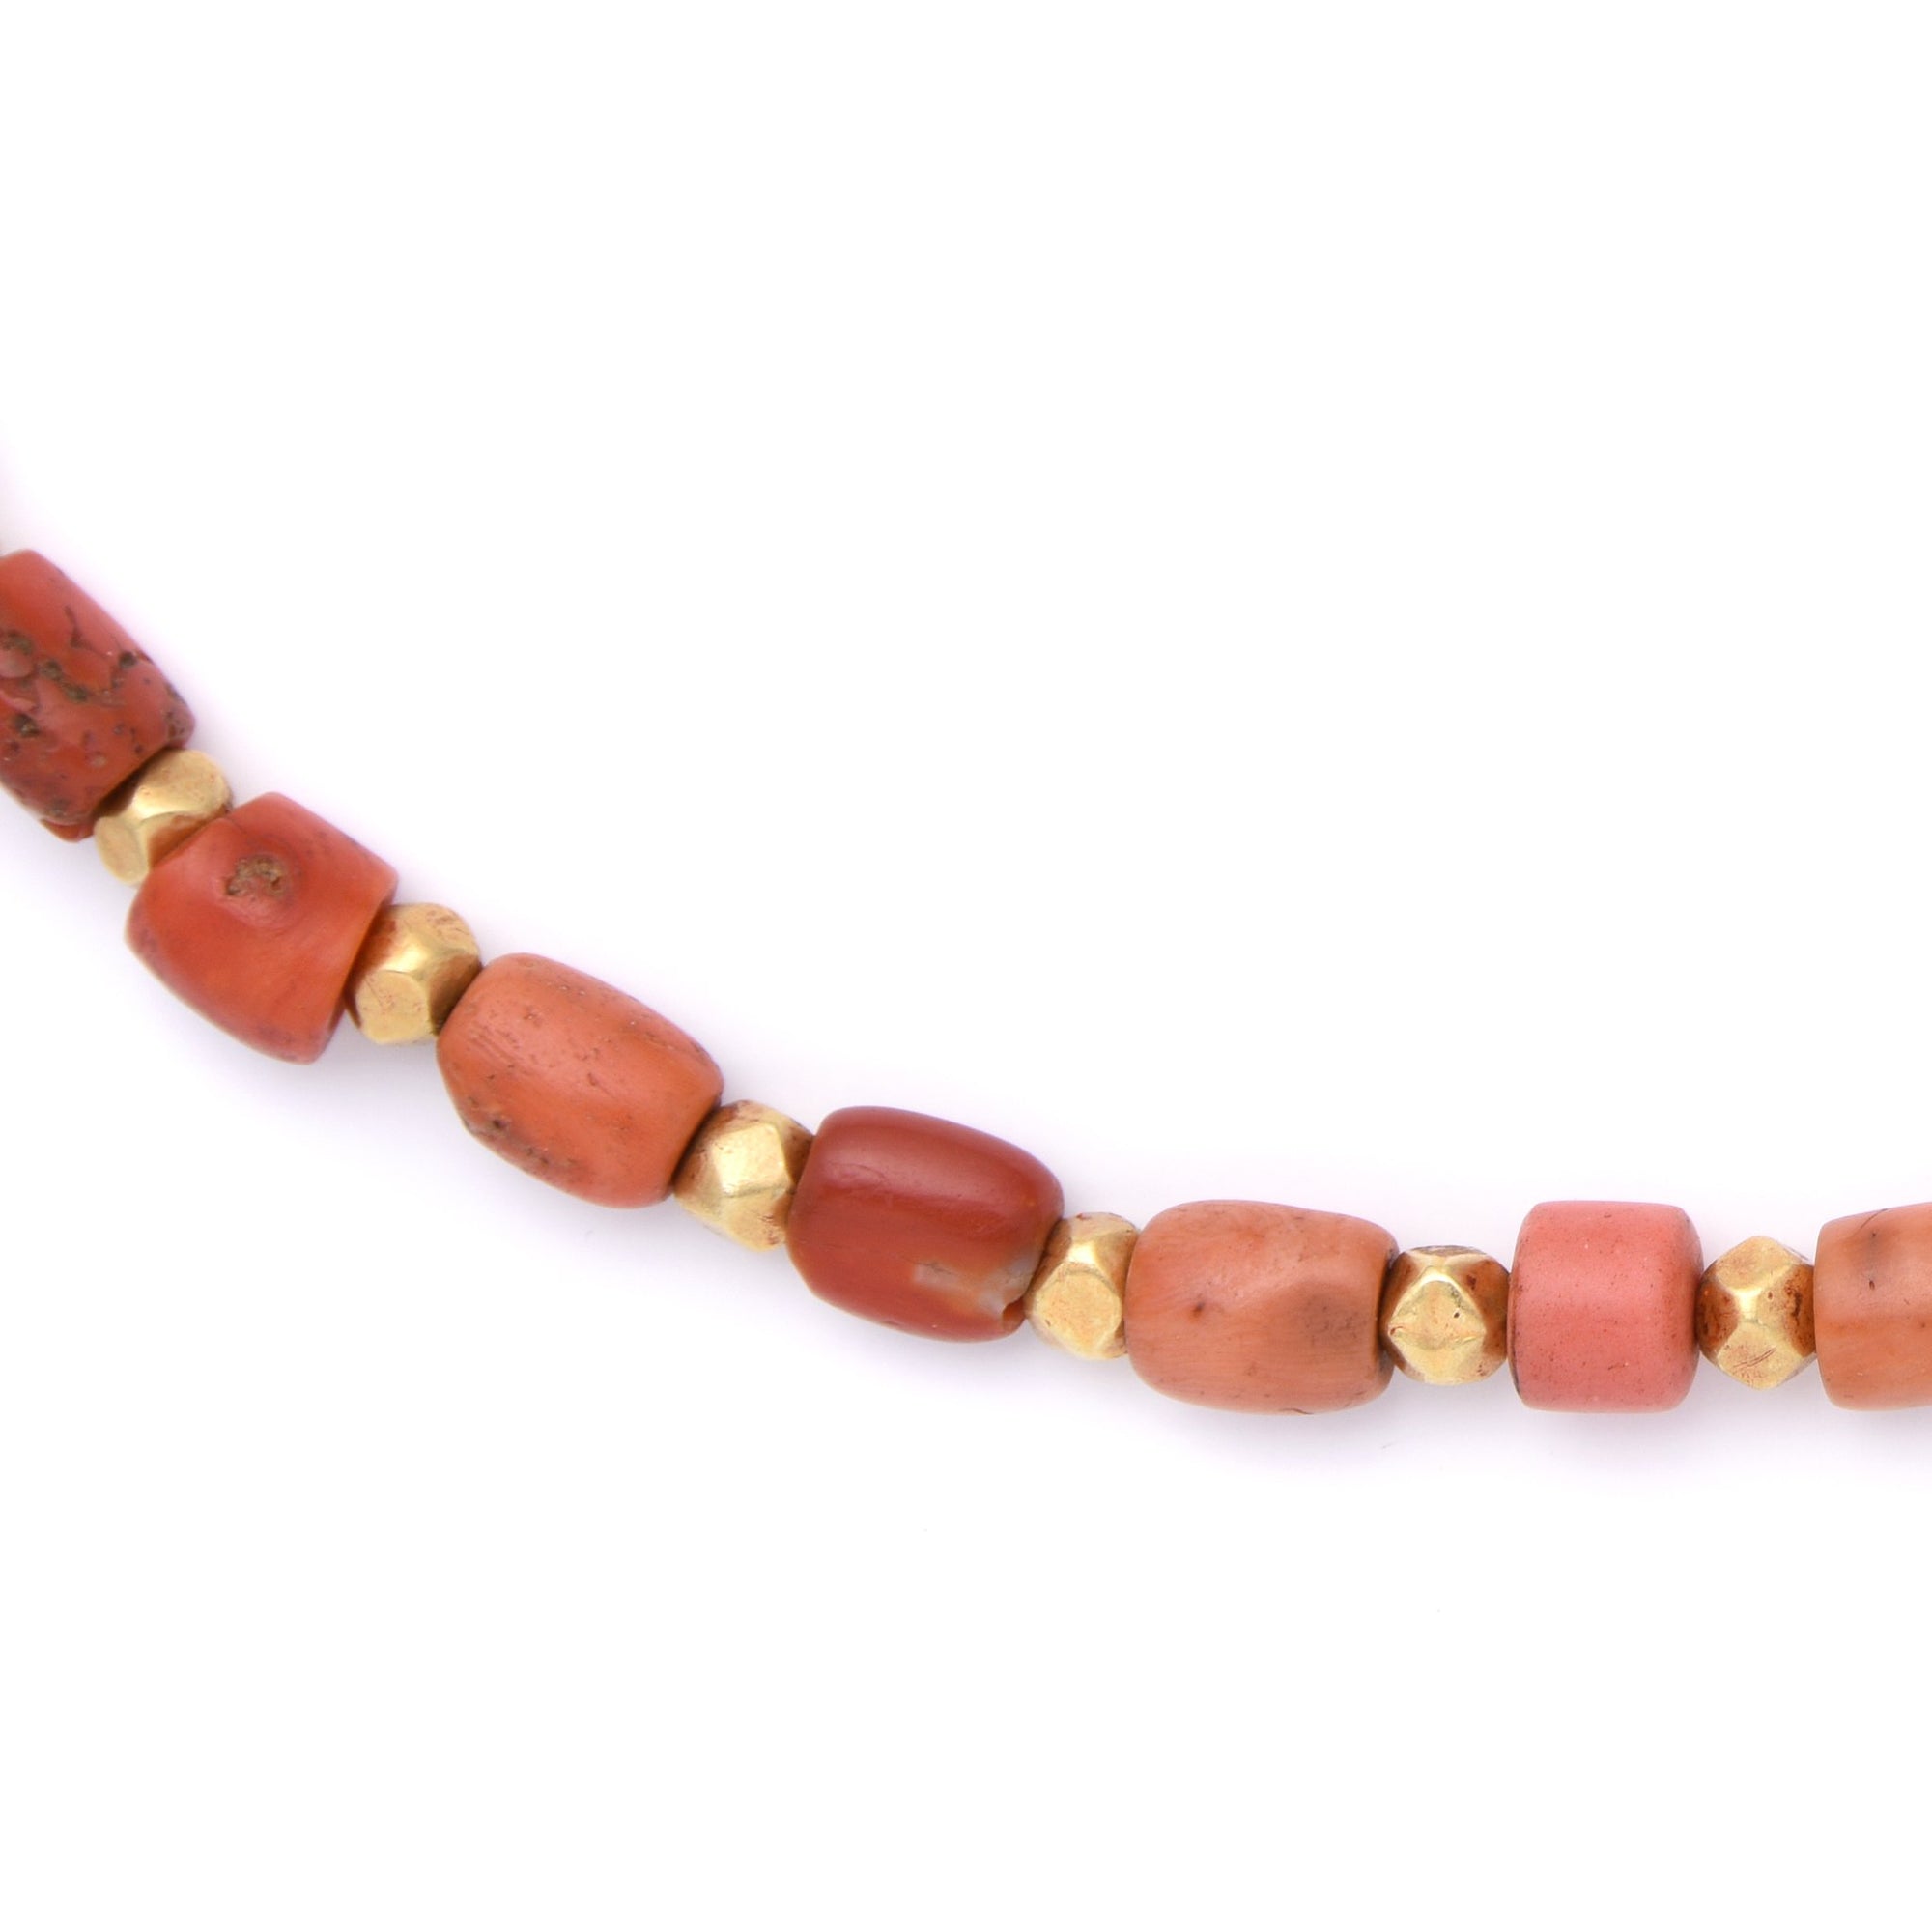 Tibetan Coral & Gold Lacquer Bead Necklace from Old Beads - Length 45 cms. Largest bead dia 1cm - A00635